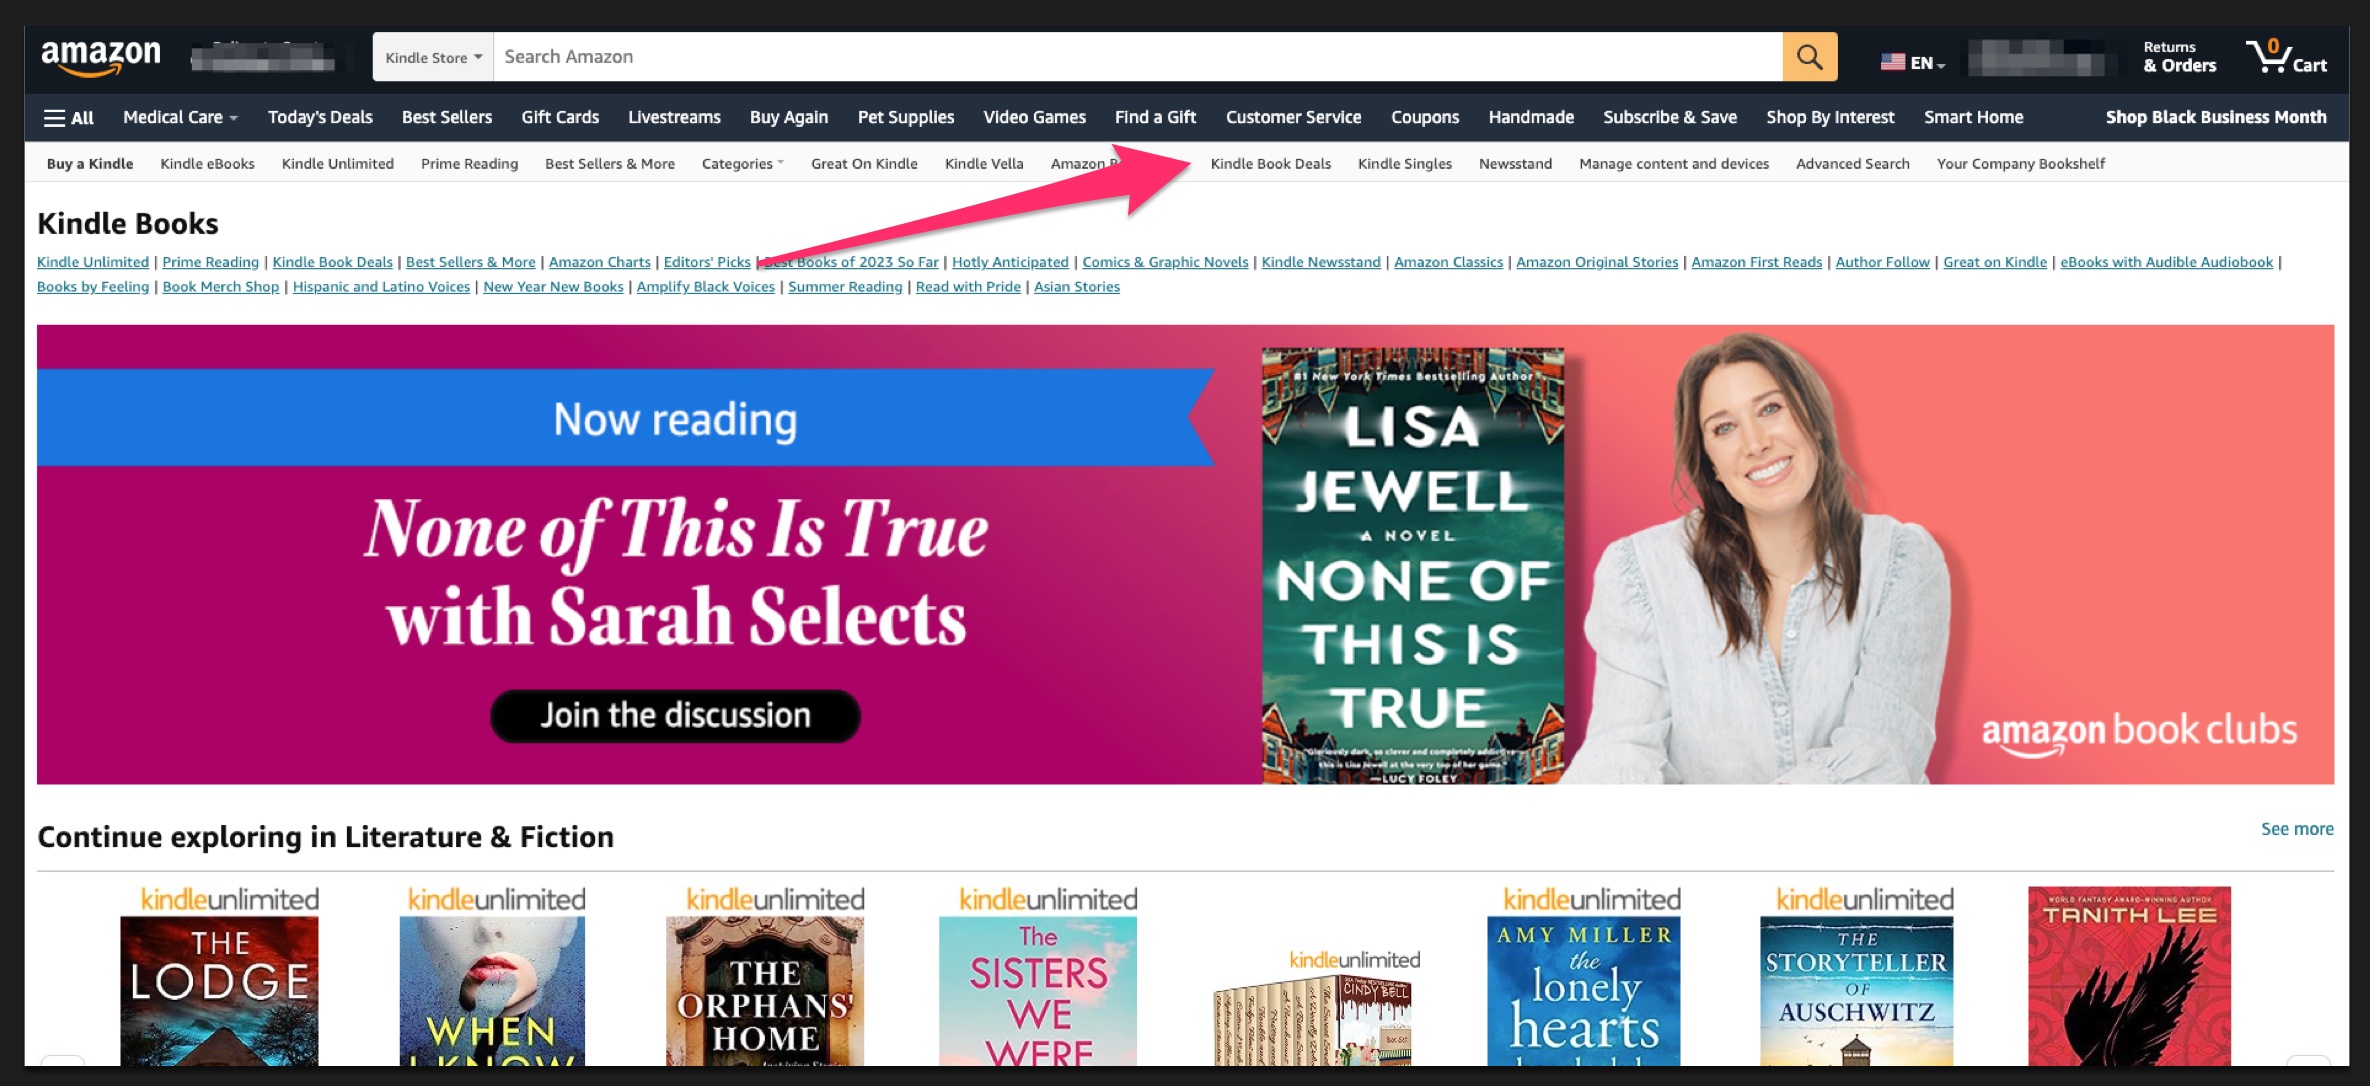 How to Find Kindle Daily Deals - Step 4